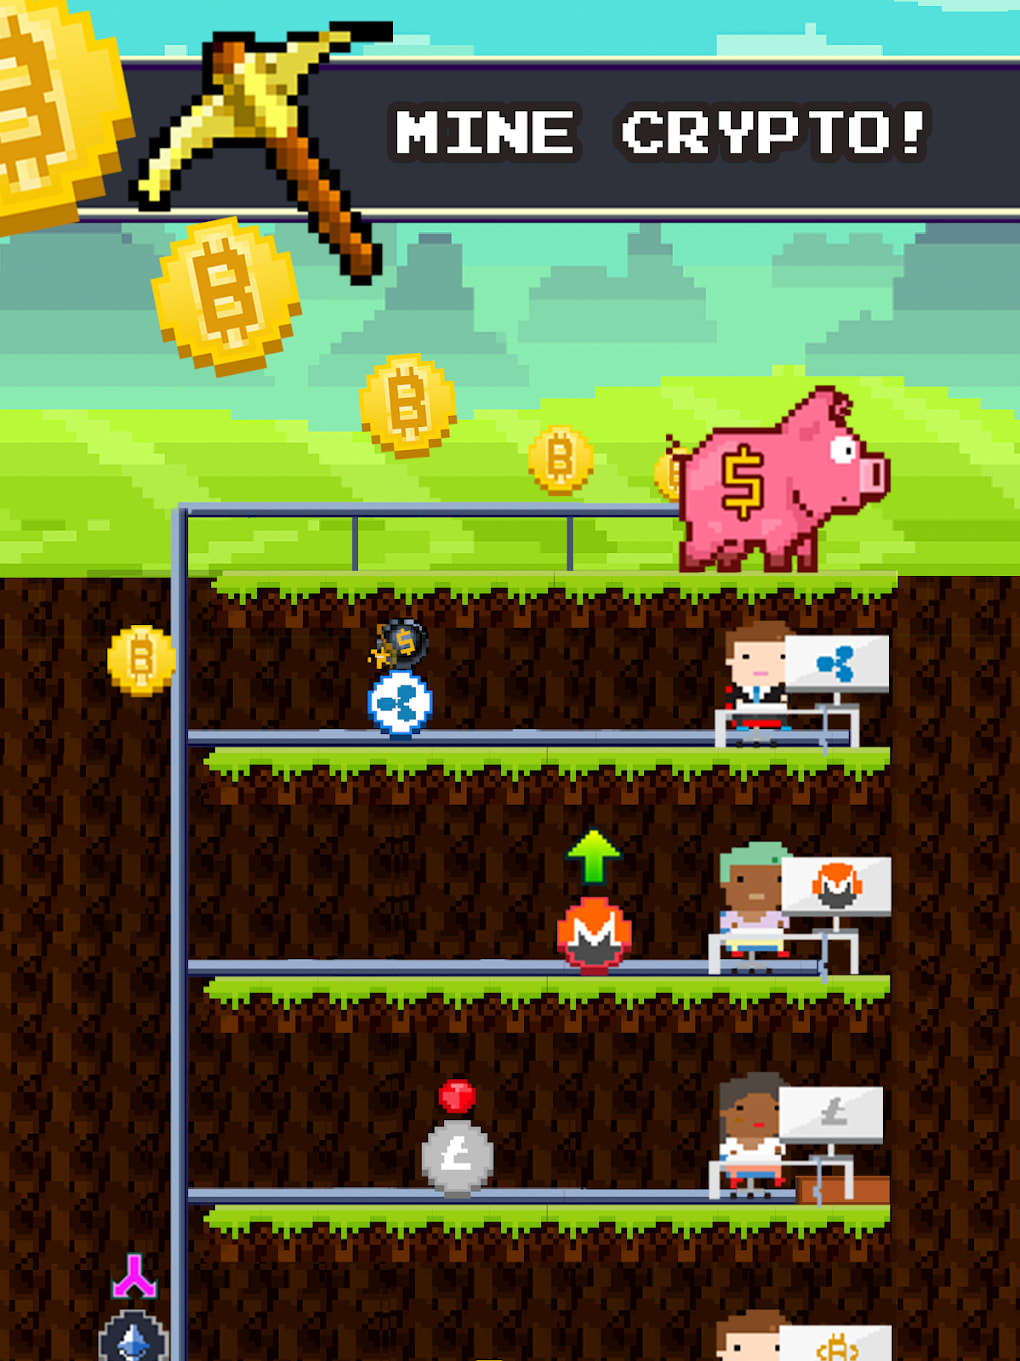 Get Real Bitcoin And Play Games Online - Top 5 BTC Mining Simulator Games -  iCharts